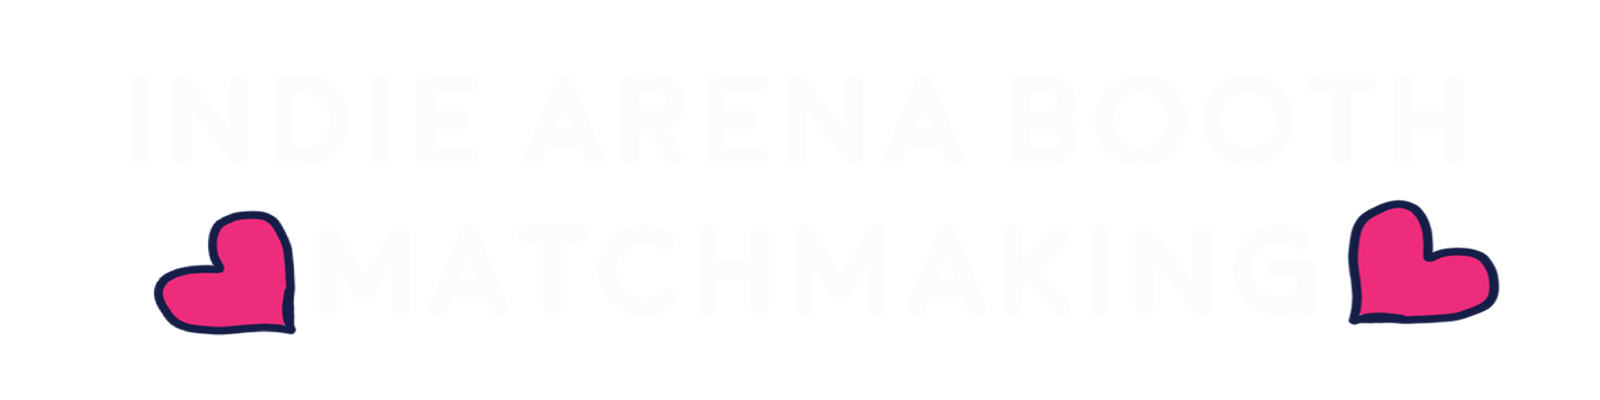 Indie Arena Booth Matchmaking